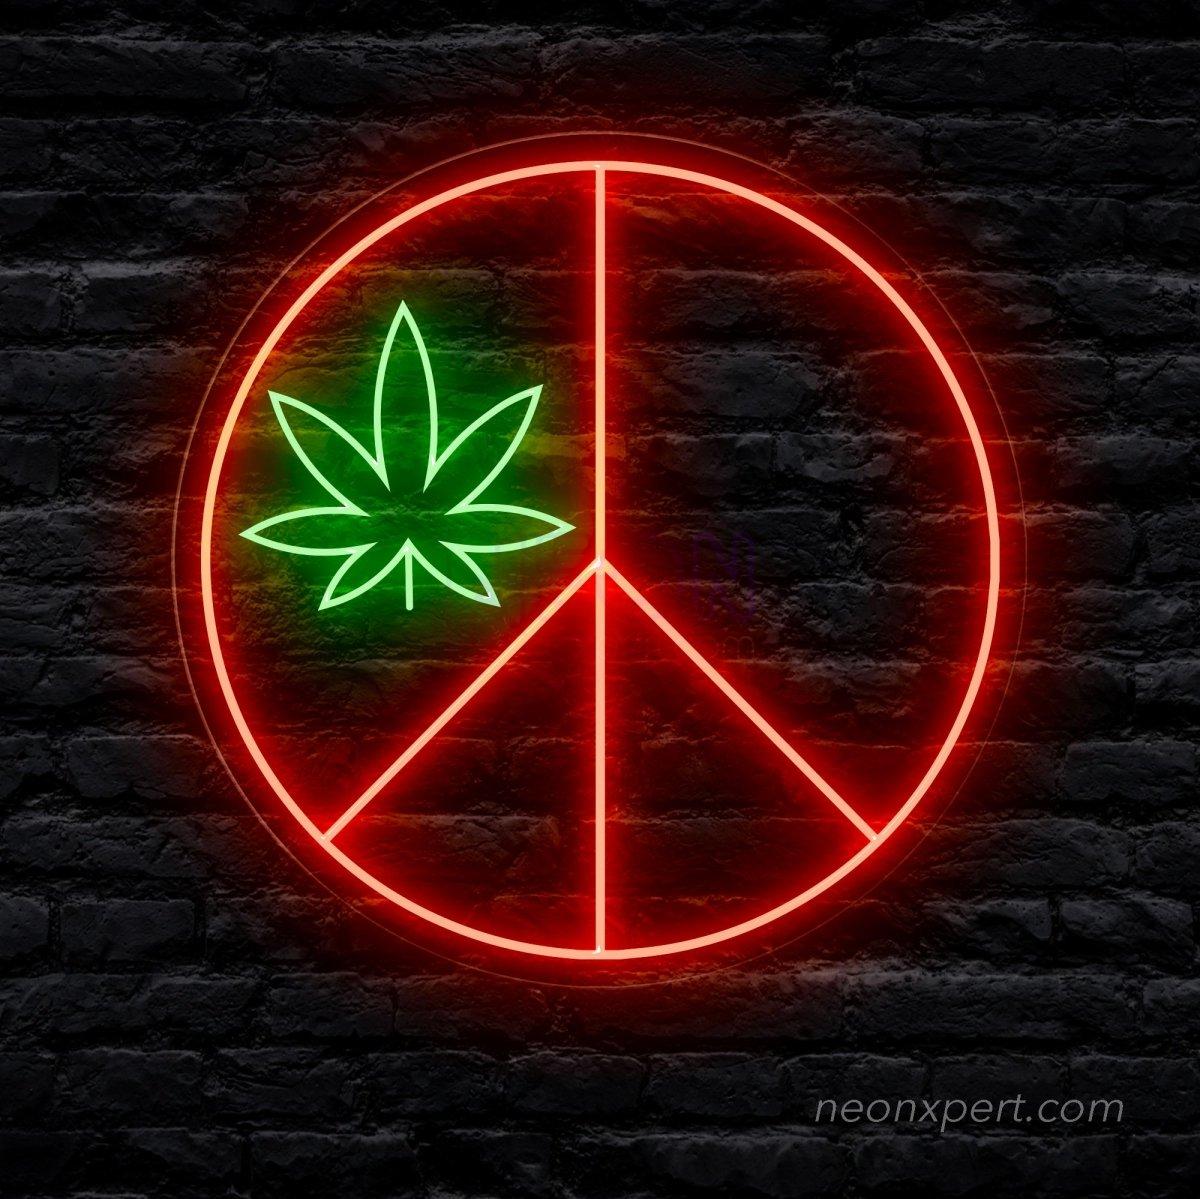 Weed Peace Symbol Led Neon Light Relaxing Decor Neonxpert